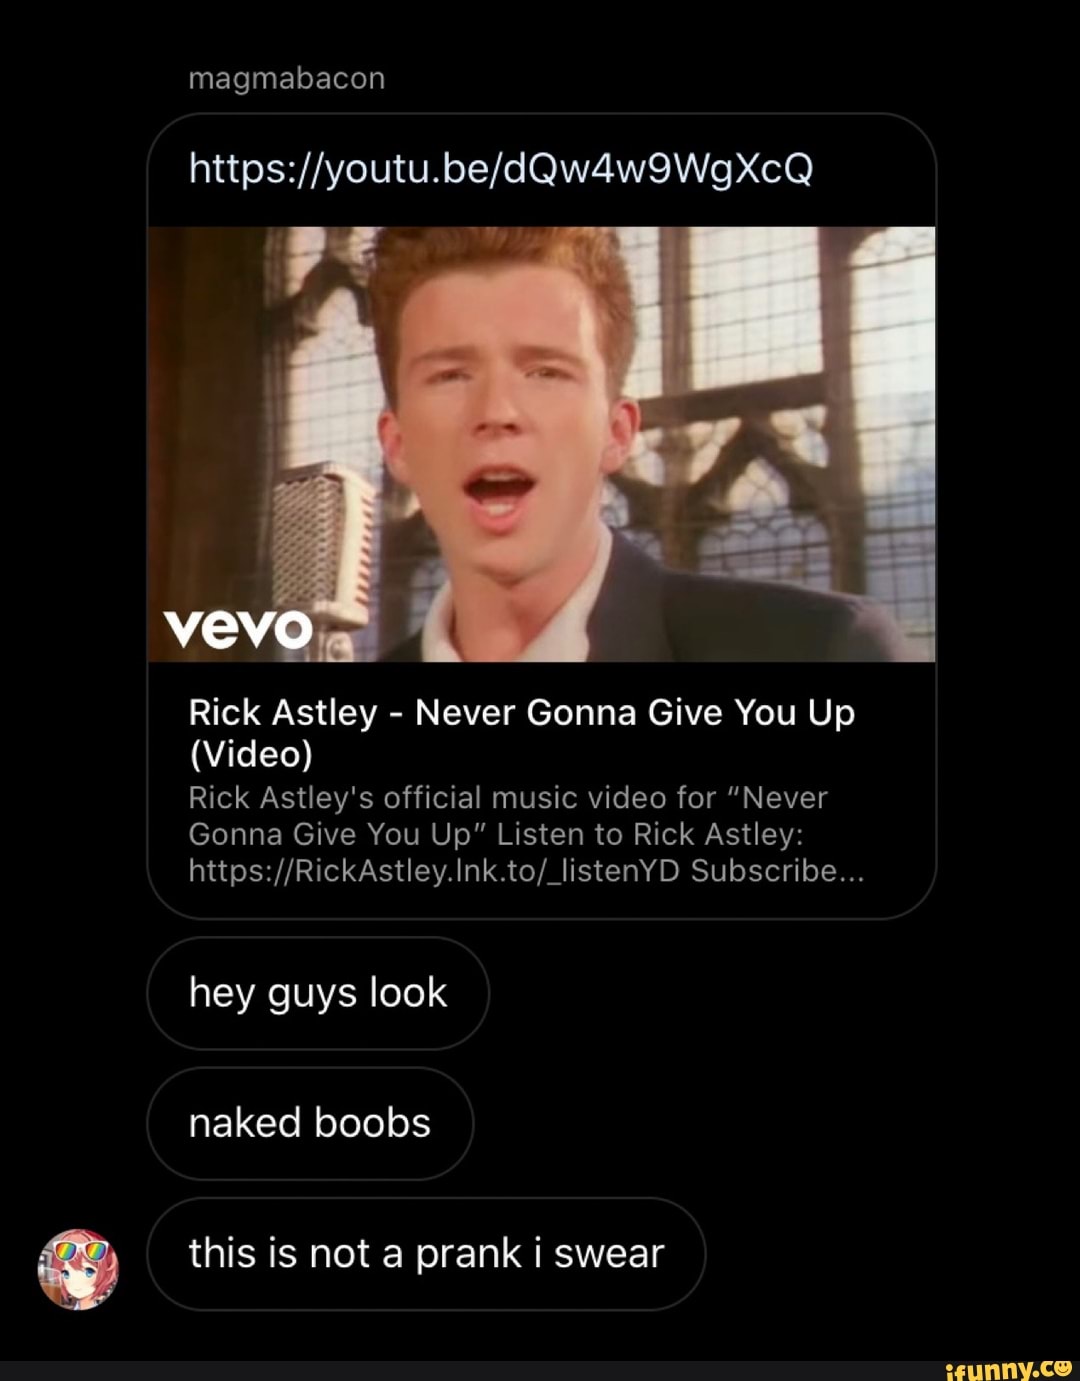 Rick ROLLS NEVER GONNA GIvE THEM UP SHUT UP AND TAKE MY MONEY - iFunny  Brazil